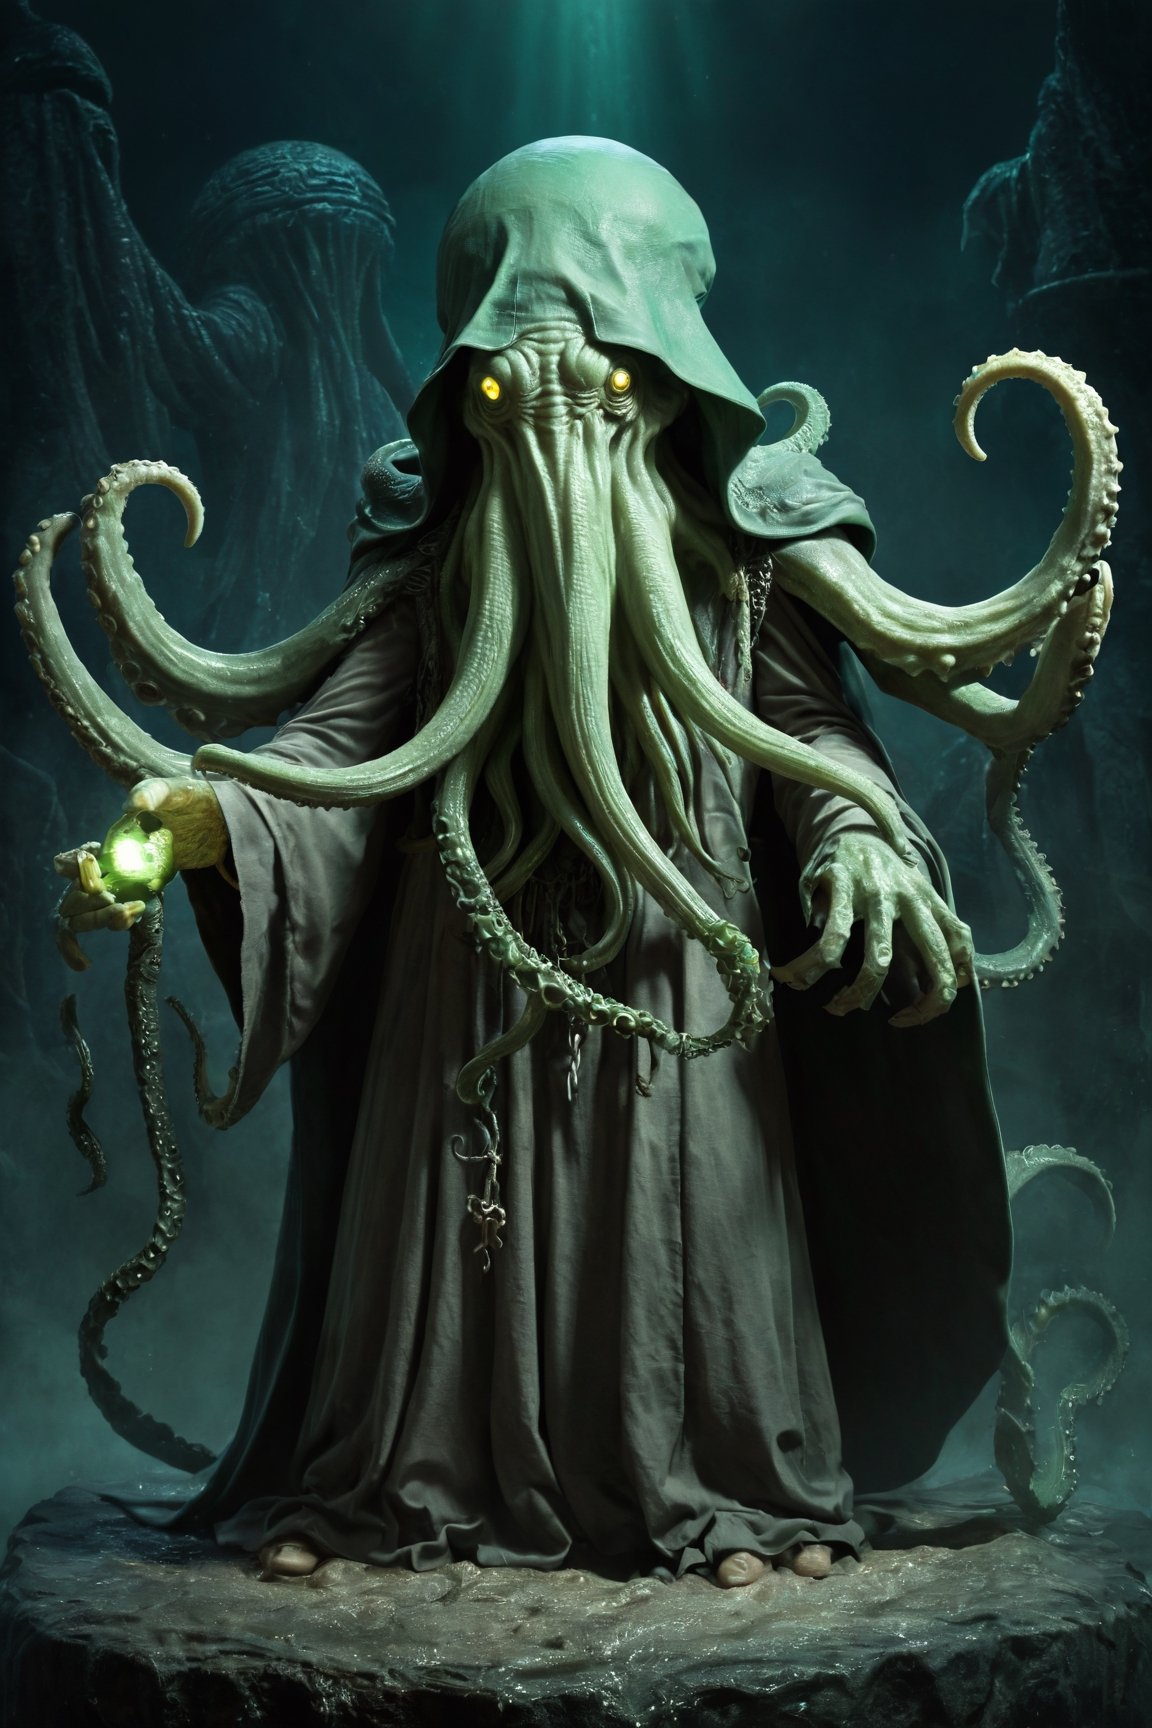 Missionary Cthulhu,emerges from the depths with an otherworldly aura, blending the devout zeal of a missionary with the unfathomable terror of Cthulhu. Cloaked in tattered robes adorned with symbols of ancient cults, it carries a tome filled with forbidden knowledge and dark prophecies. Its eyes glow with an unearthly light as it spreads its message of cosmic dominion to the far corners of the earth. With each step, it leaves behind a trail of madness and despair, converting the unsuspecting into fervent followers of the eldritch faith. The Missionary Cthulhu is a harbinger of doom,